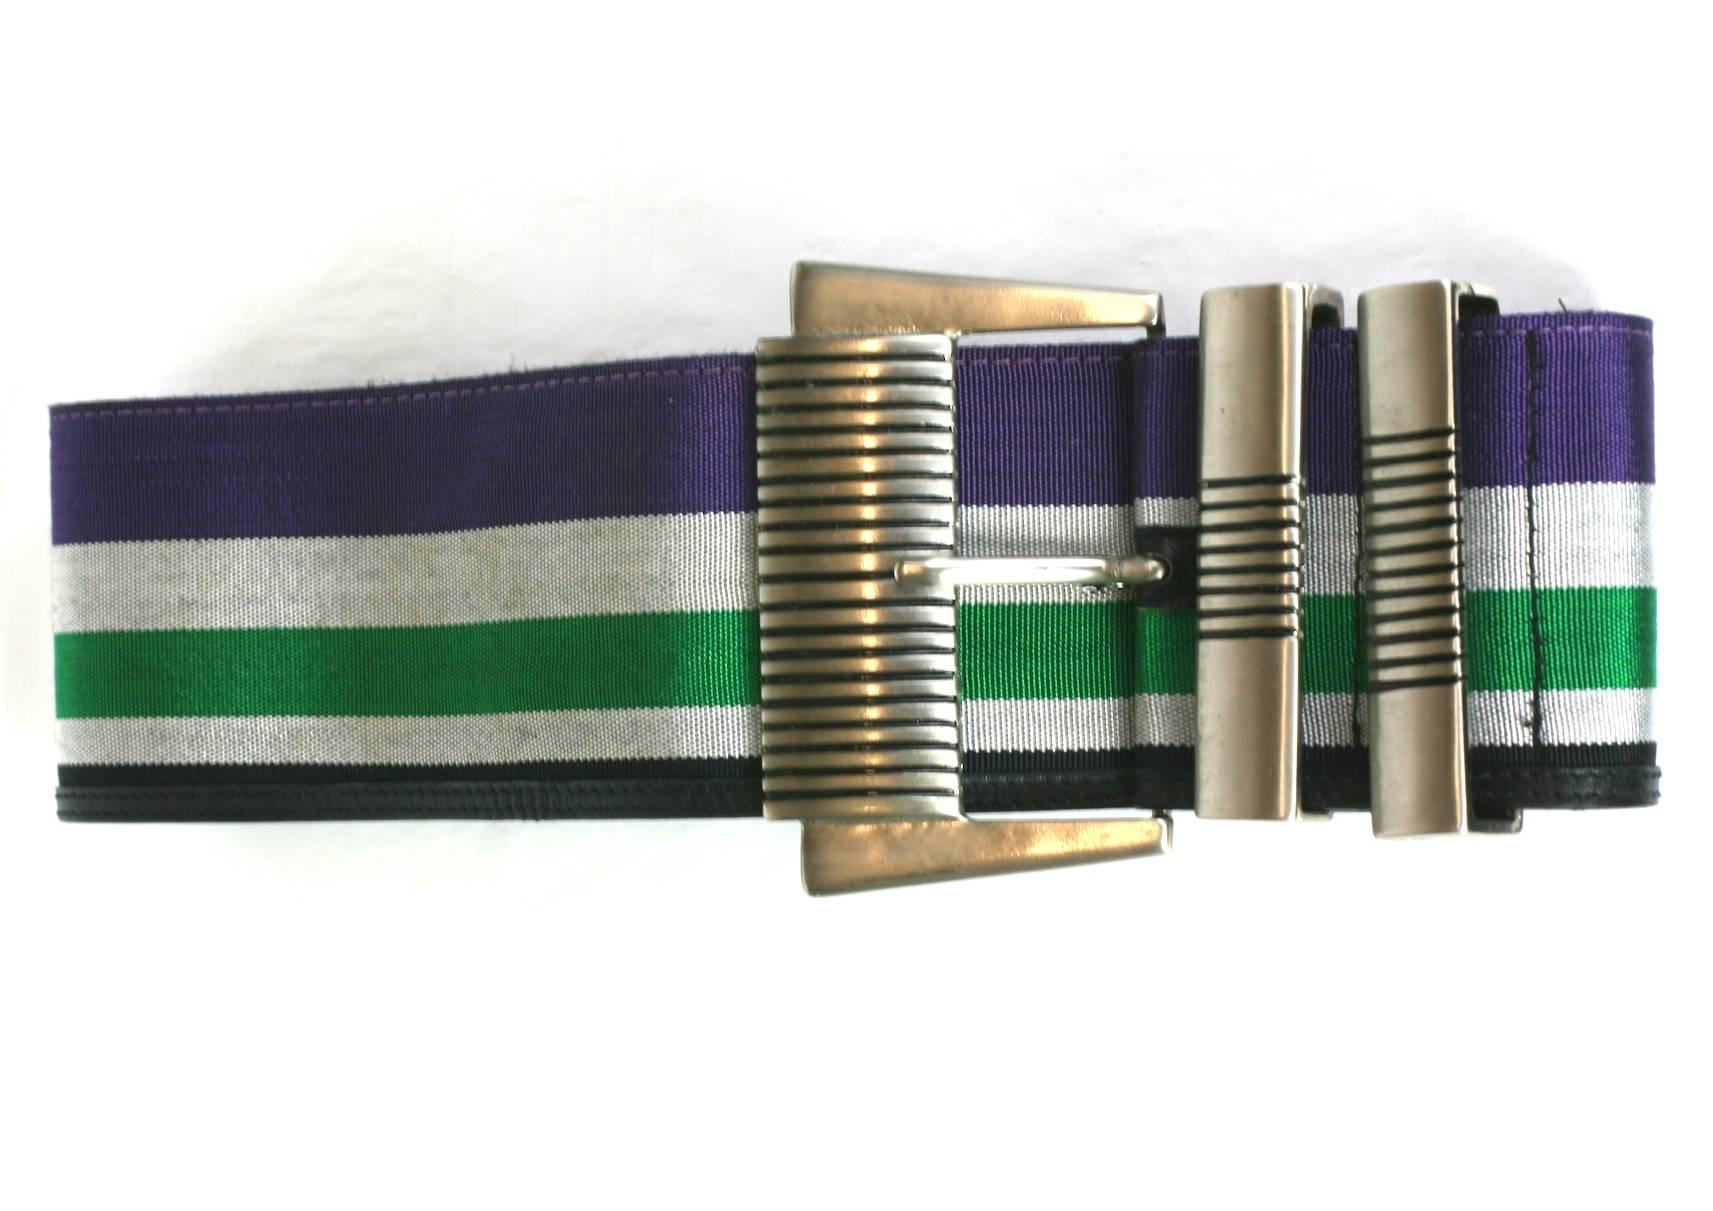 Gianni Versace woven striped belt. Large antiqued silver ribbed buckle with woven striped ribbon in shades of pale gray, green, purple with a band of fine black leather on one edge.
Stamped Gianni Versace, Excellent Condition.
Size Italian 70/ 28, 